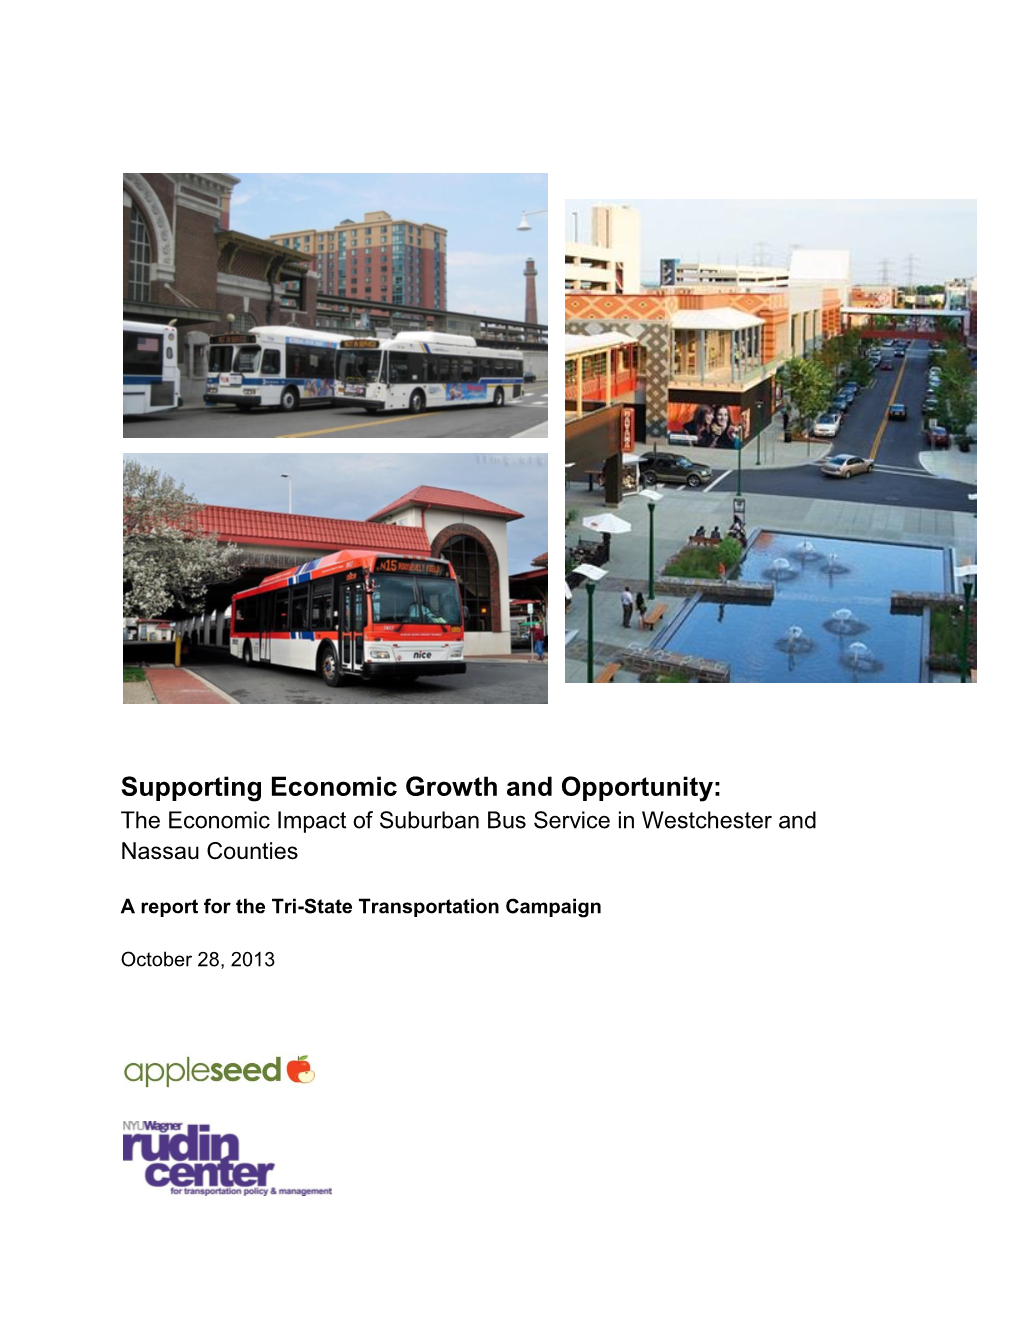 Supporting Economic Growth and Opportunity: the Economic Impact of Suburban Bus Service in Westchester and Nassau Counties